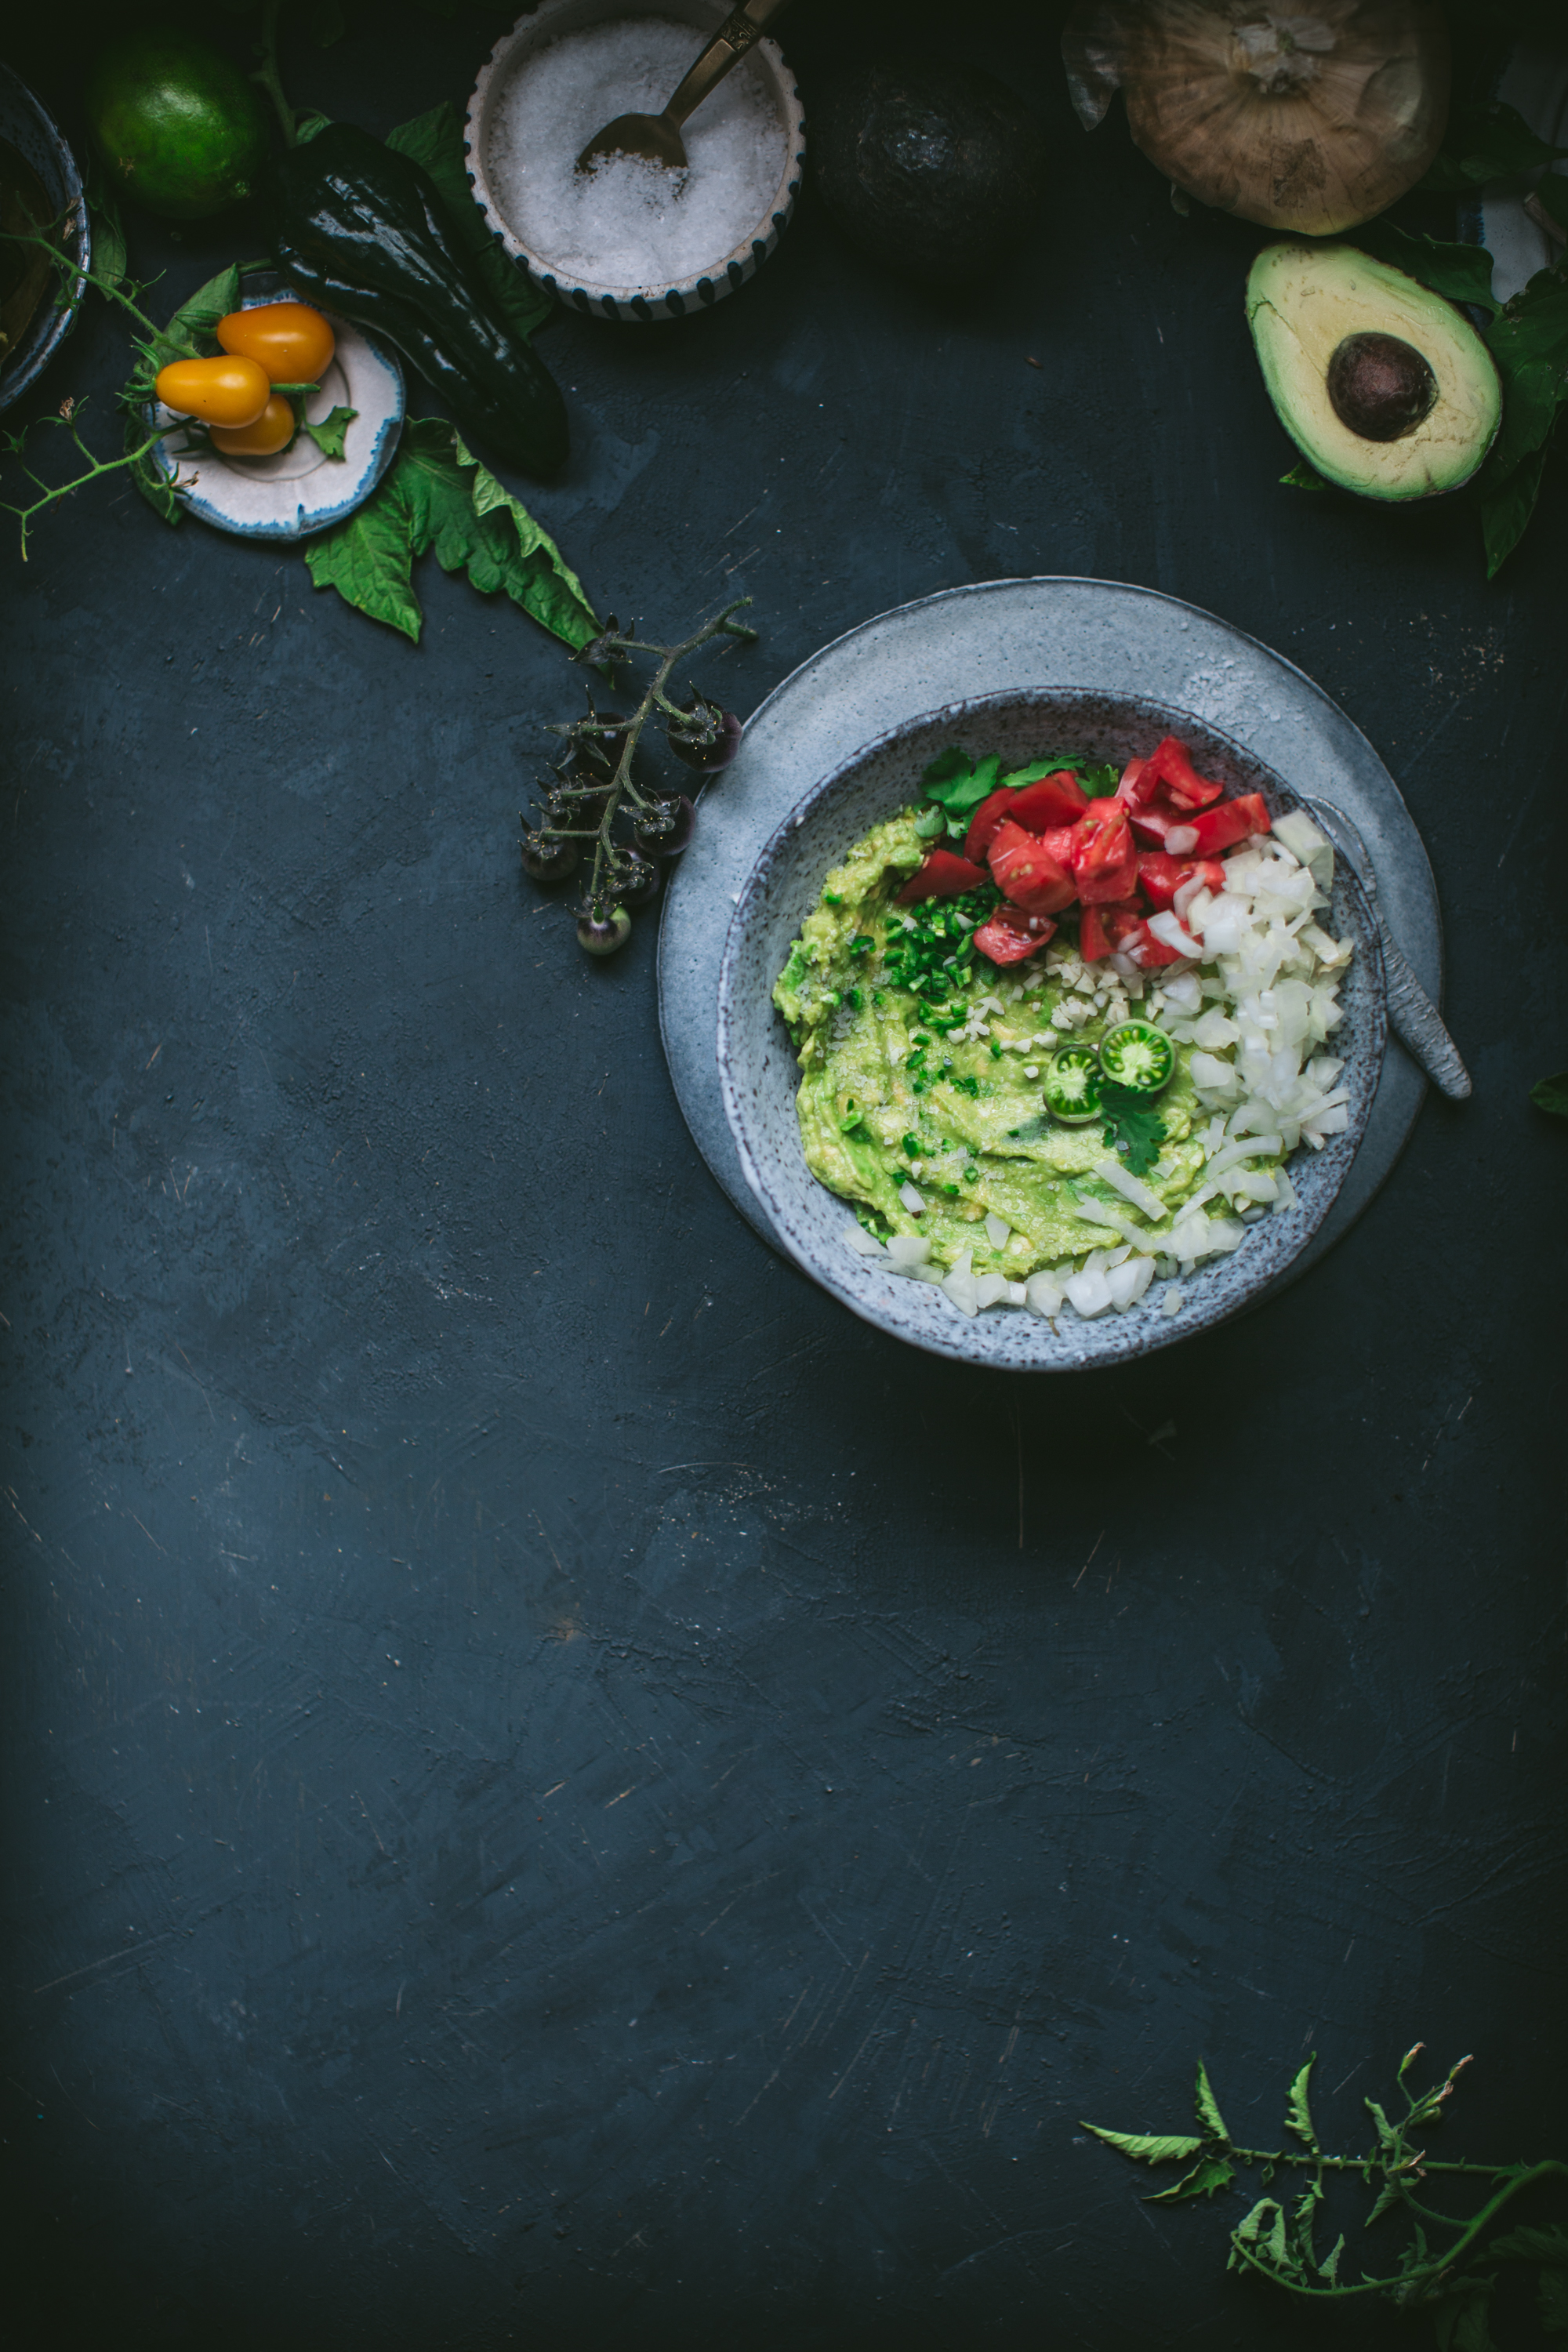 How to Make Guacamole, and easy summer recipe by Eva Kosmas Flores | Adventures in Cooking